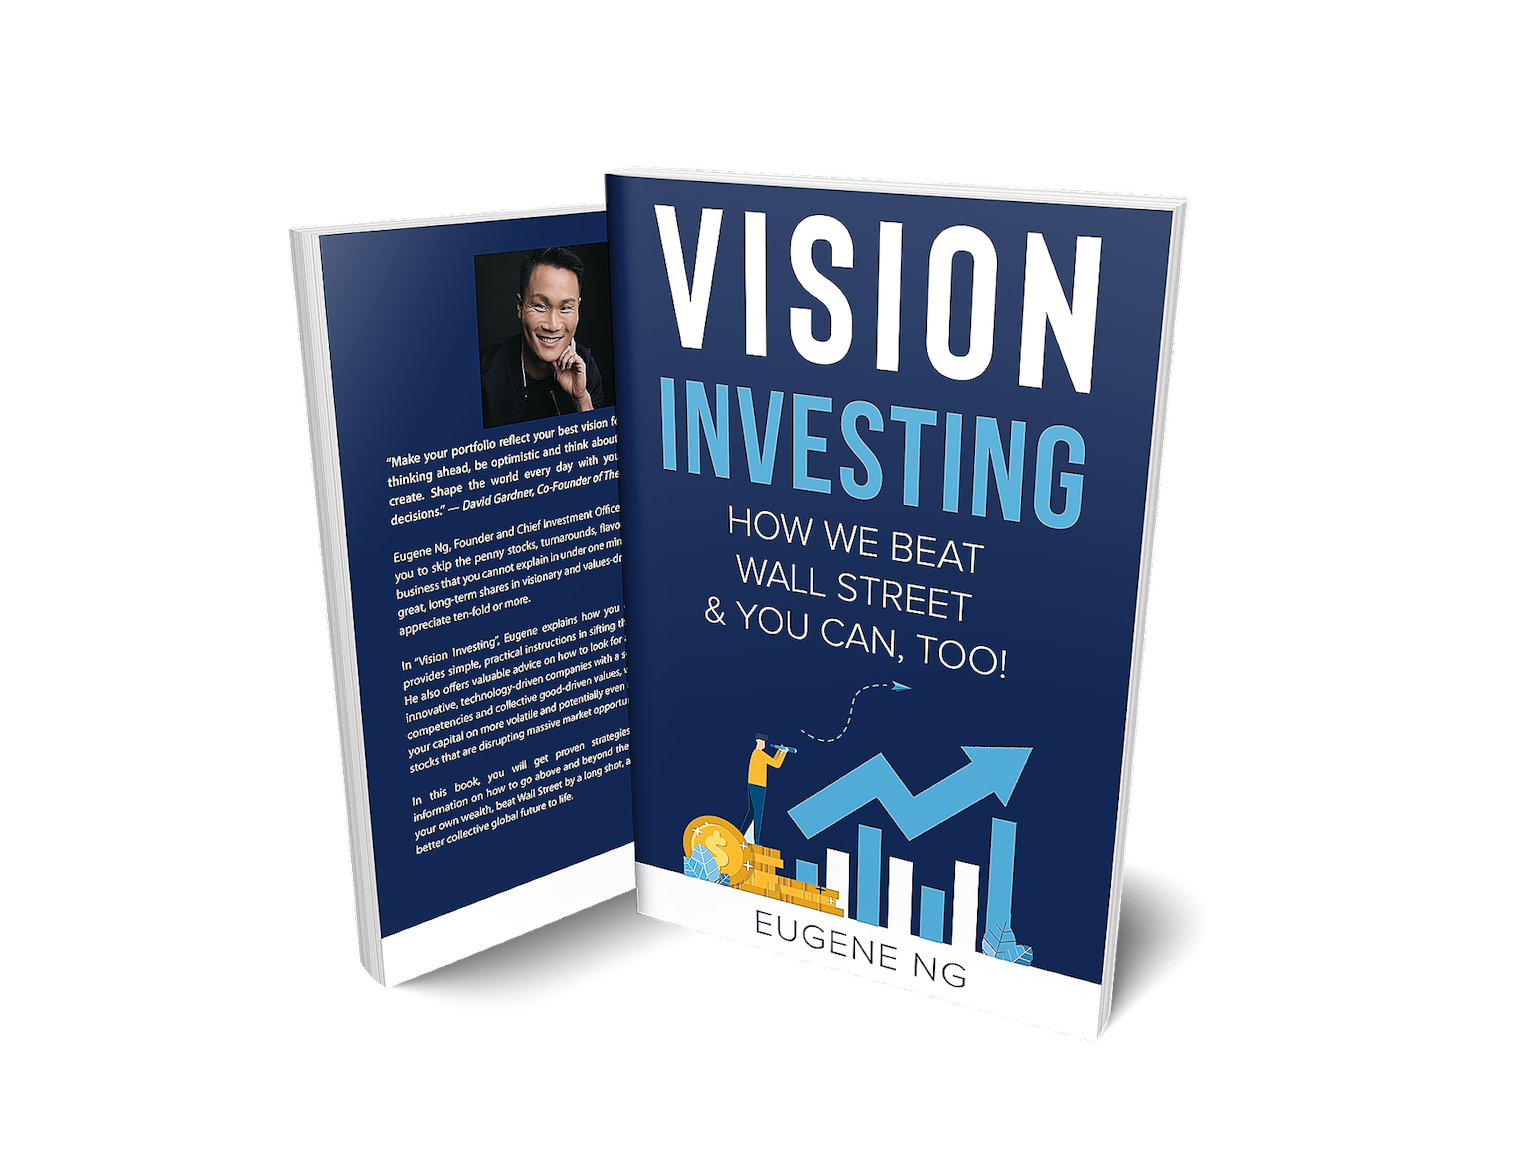 Vision Investing: How We Beat Wall Street & You Can, Too!